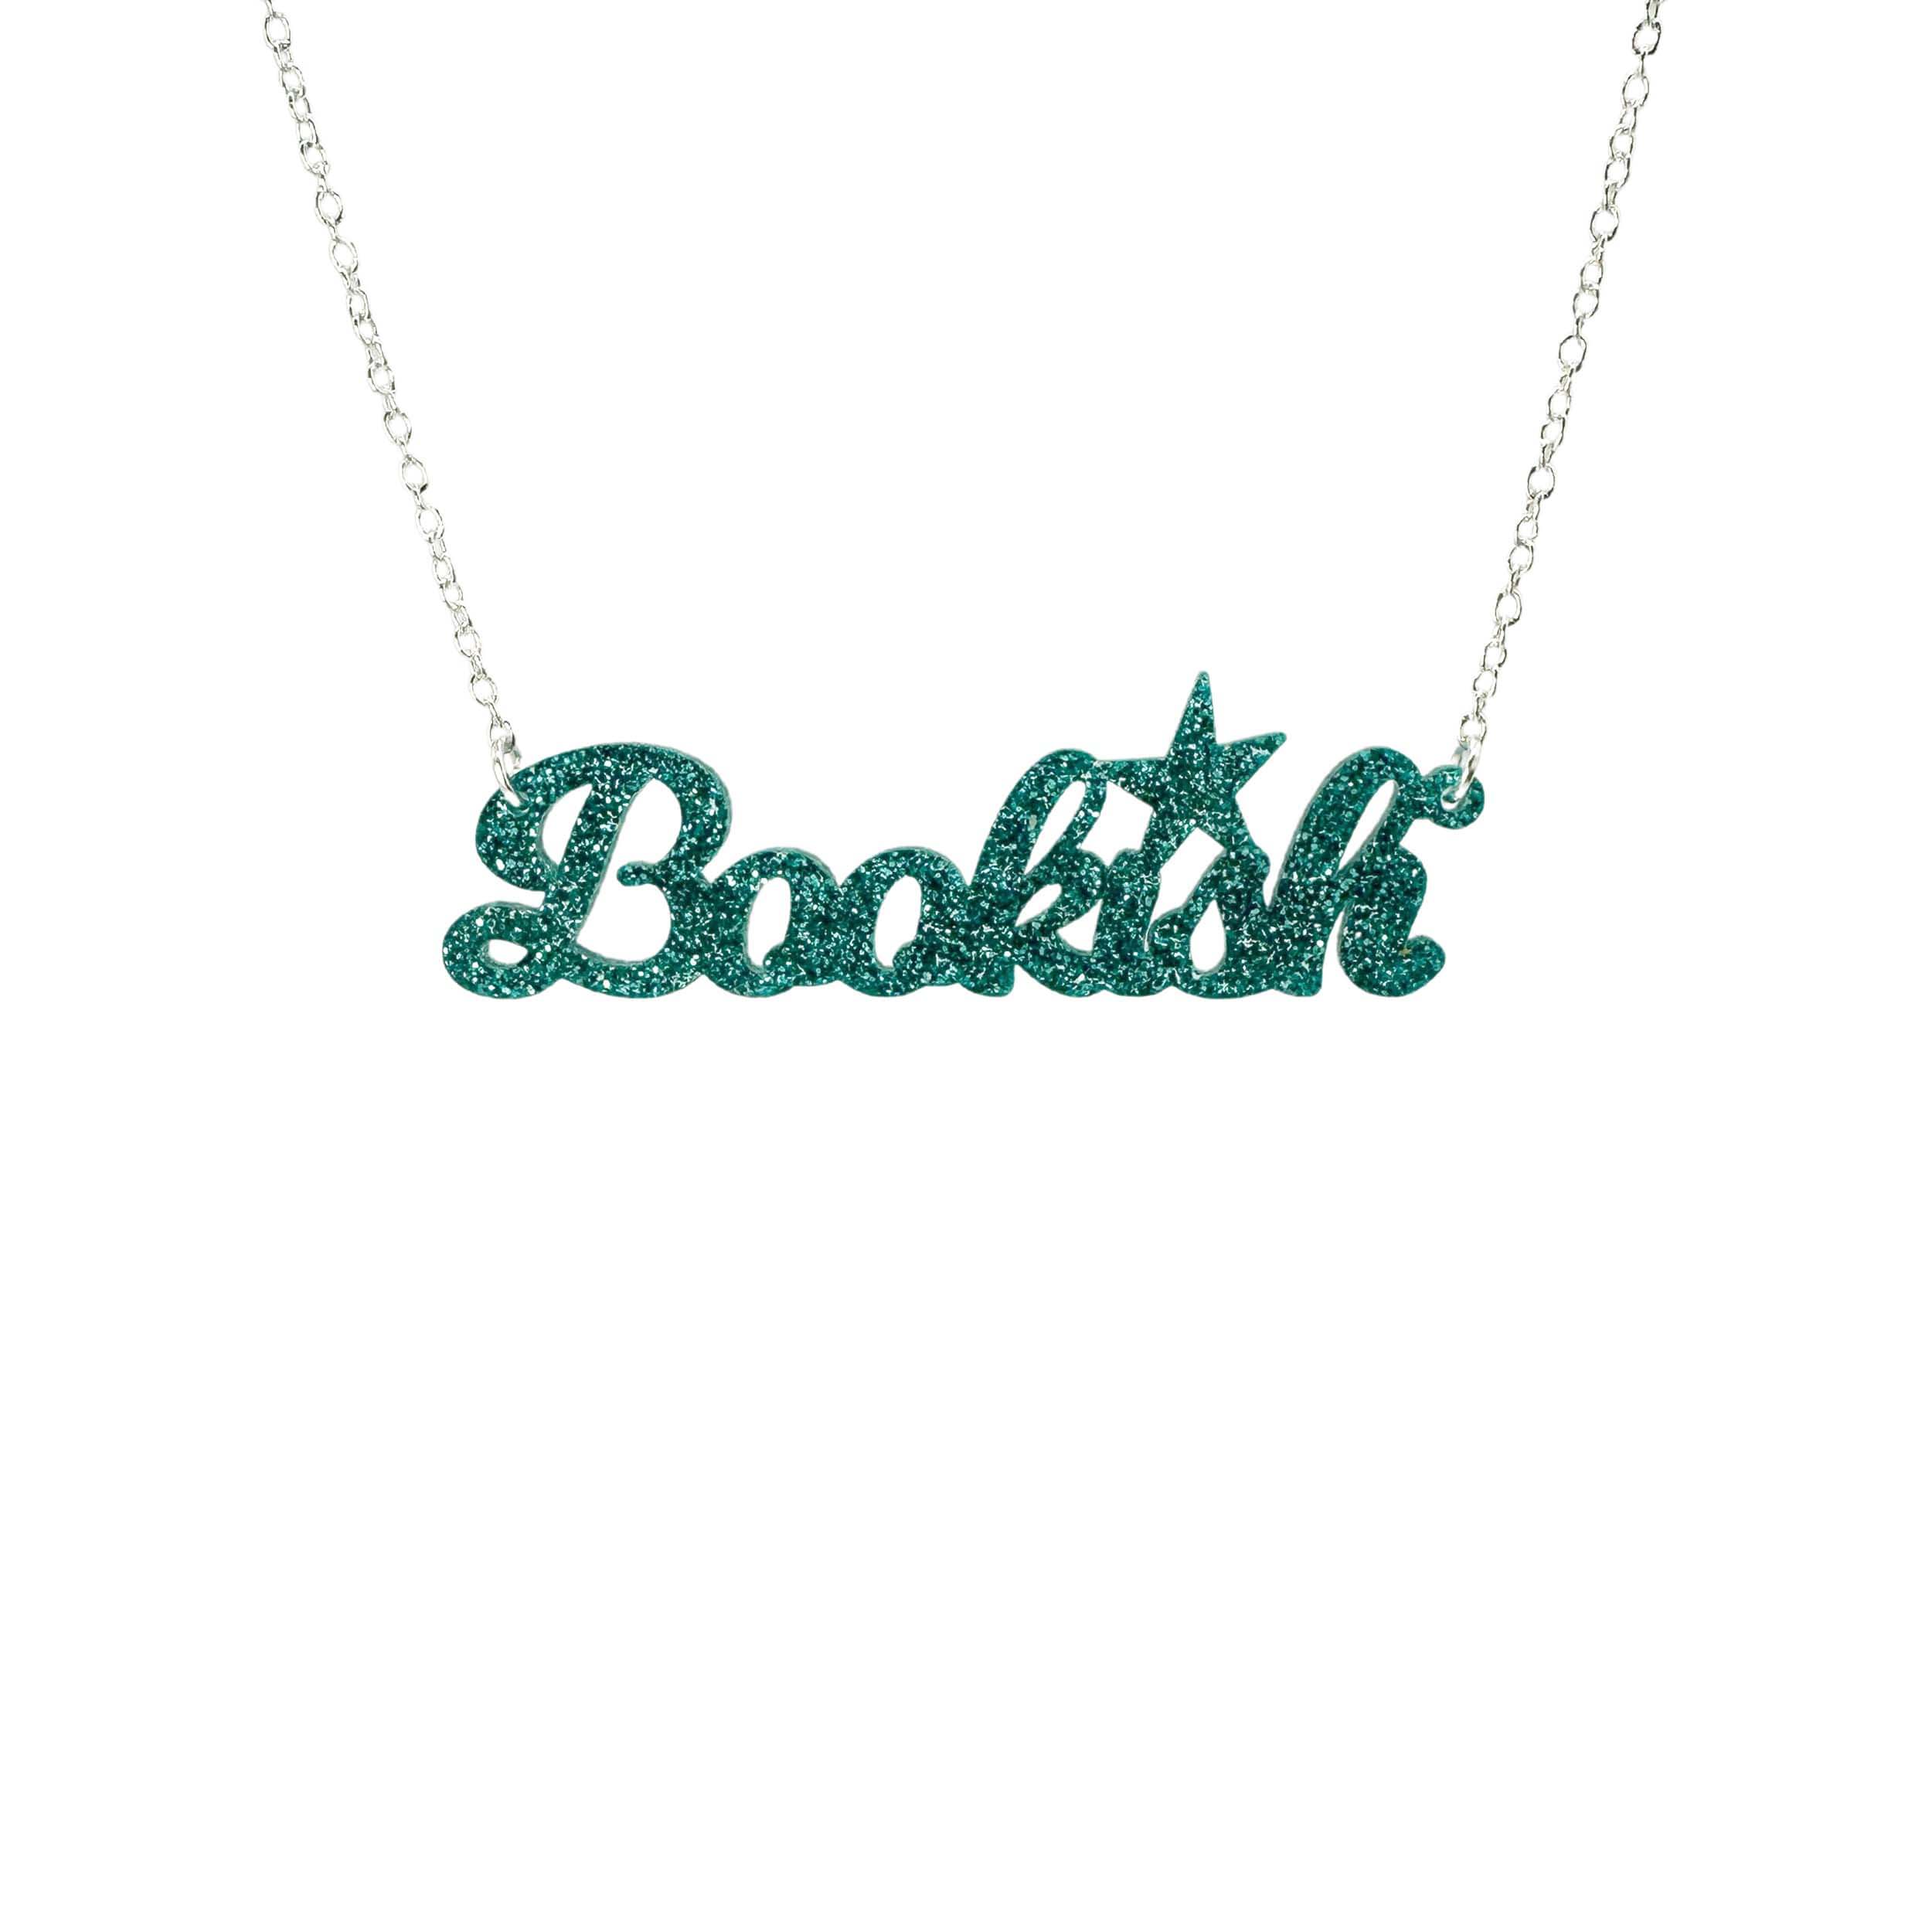 Bookish necklace in teal glitter shown hanging against a white background. For bookish people and book lovers everywhere! 